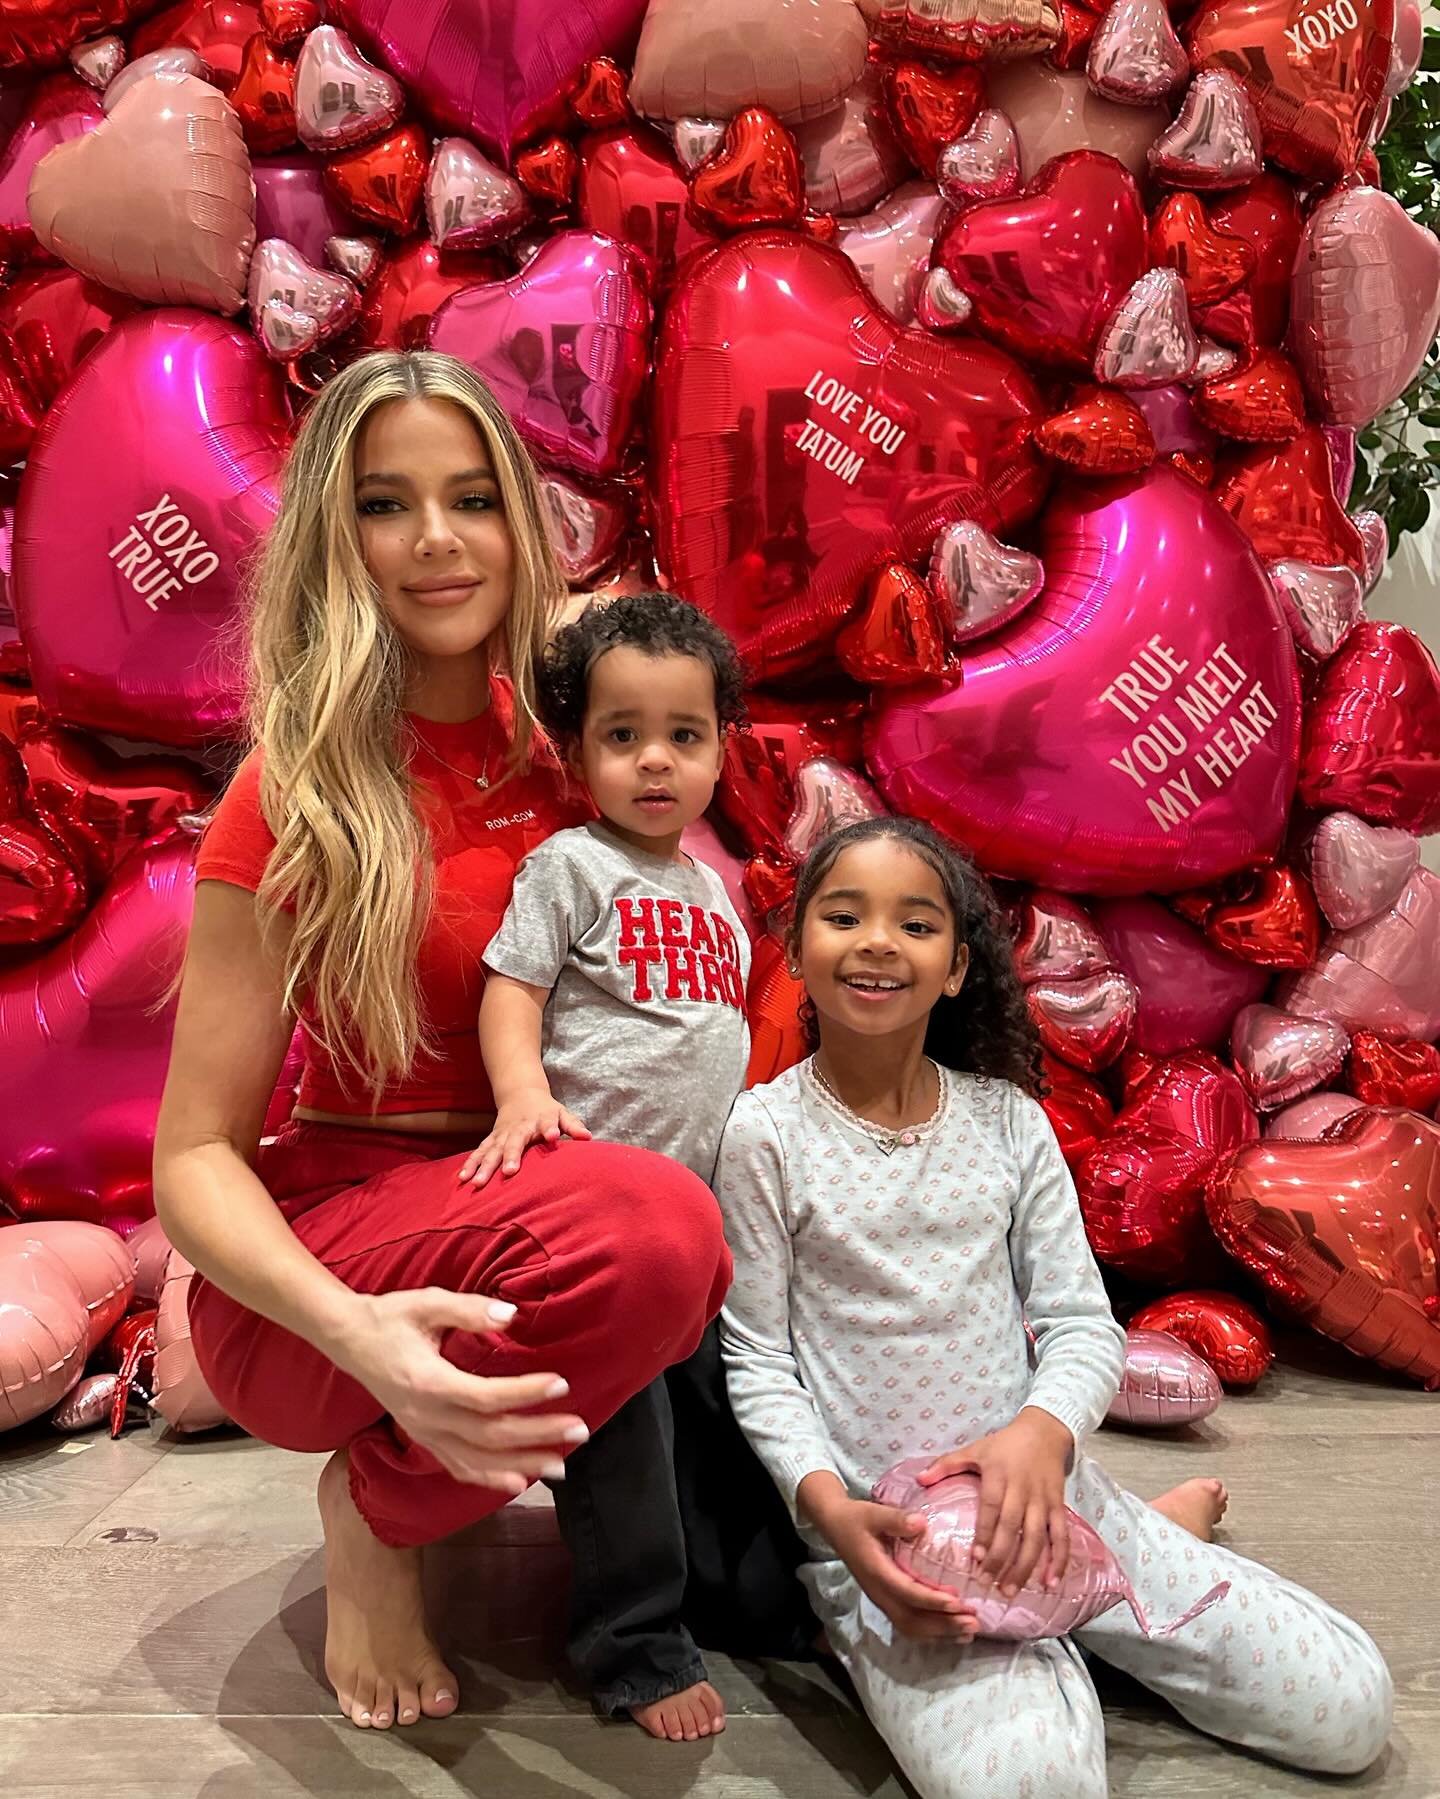 Khloe shares her two adorable tots with Tristan Thomspon, who cheated on her multiple times even while pregnant